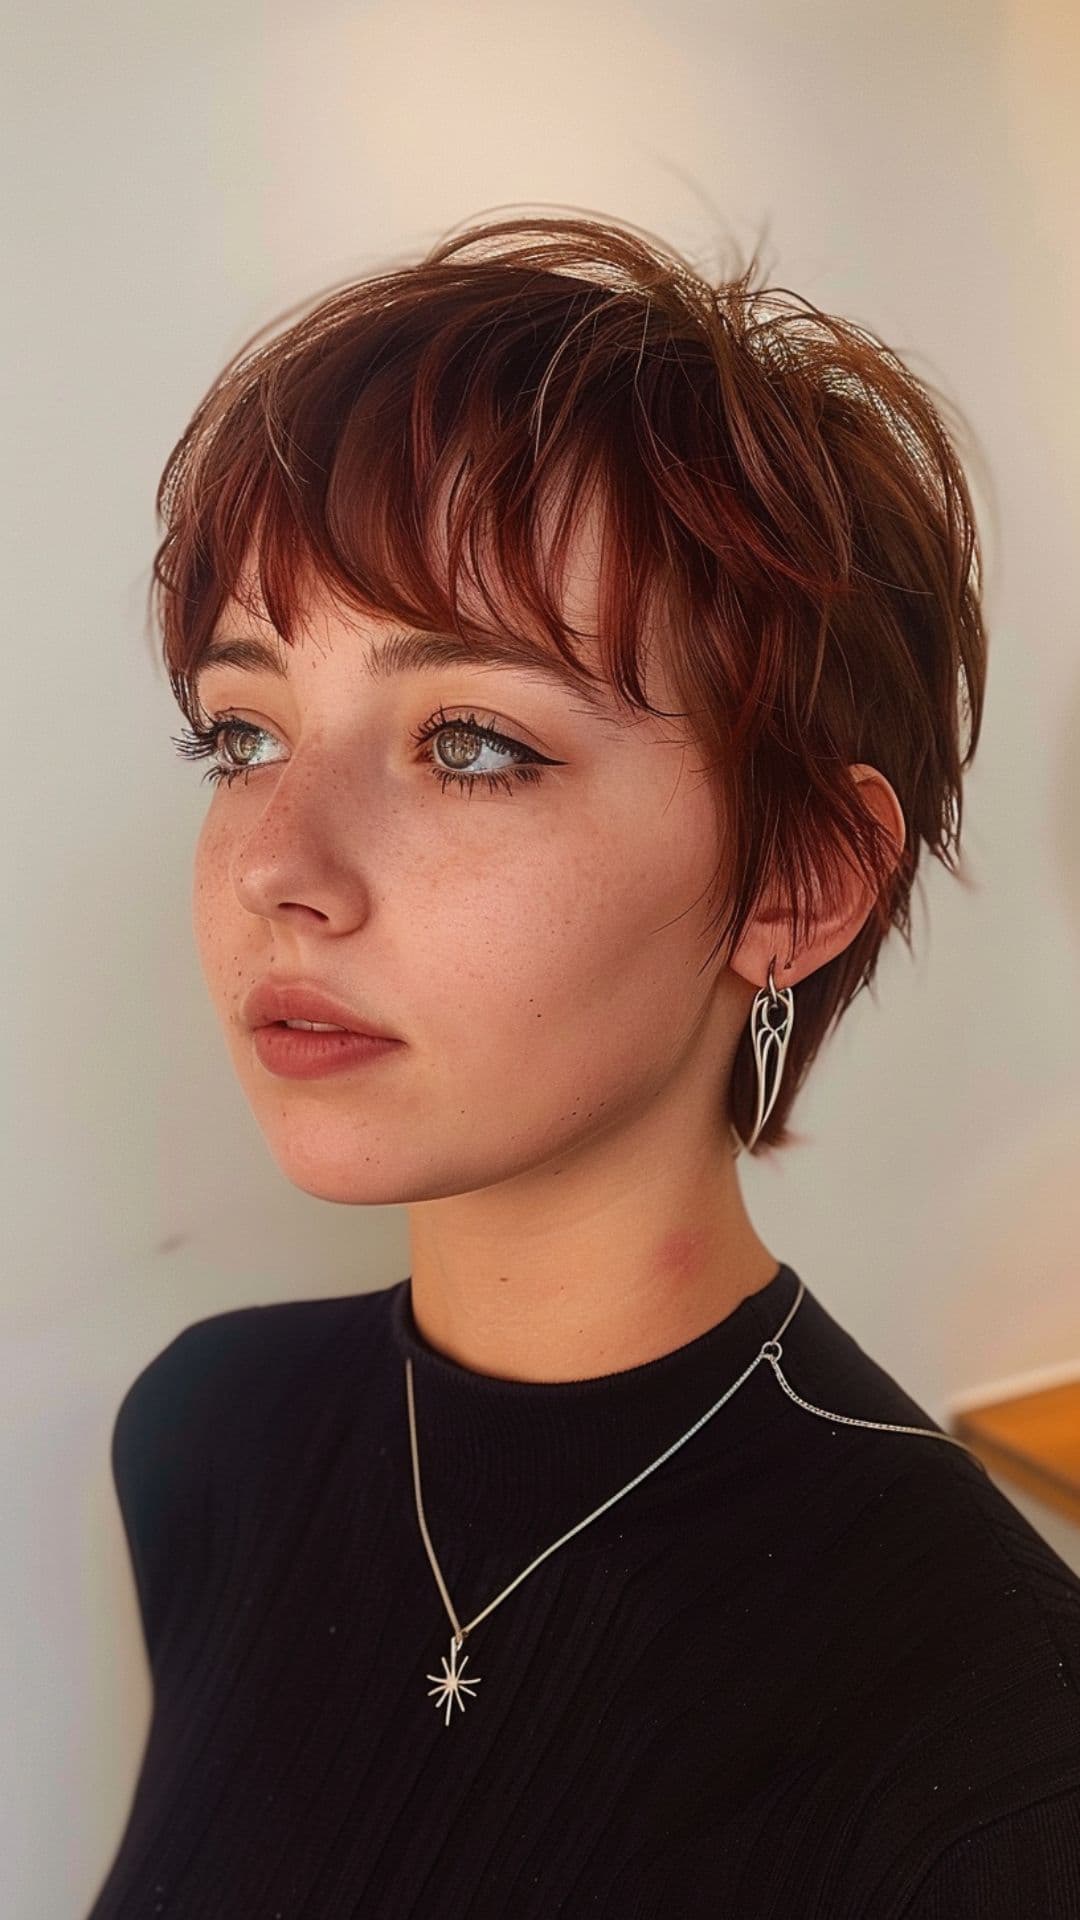 A woman modelling a classic pixie with soft fringe.